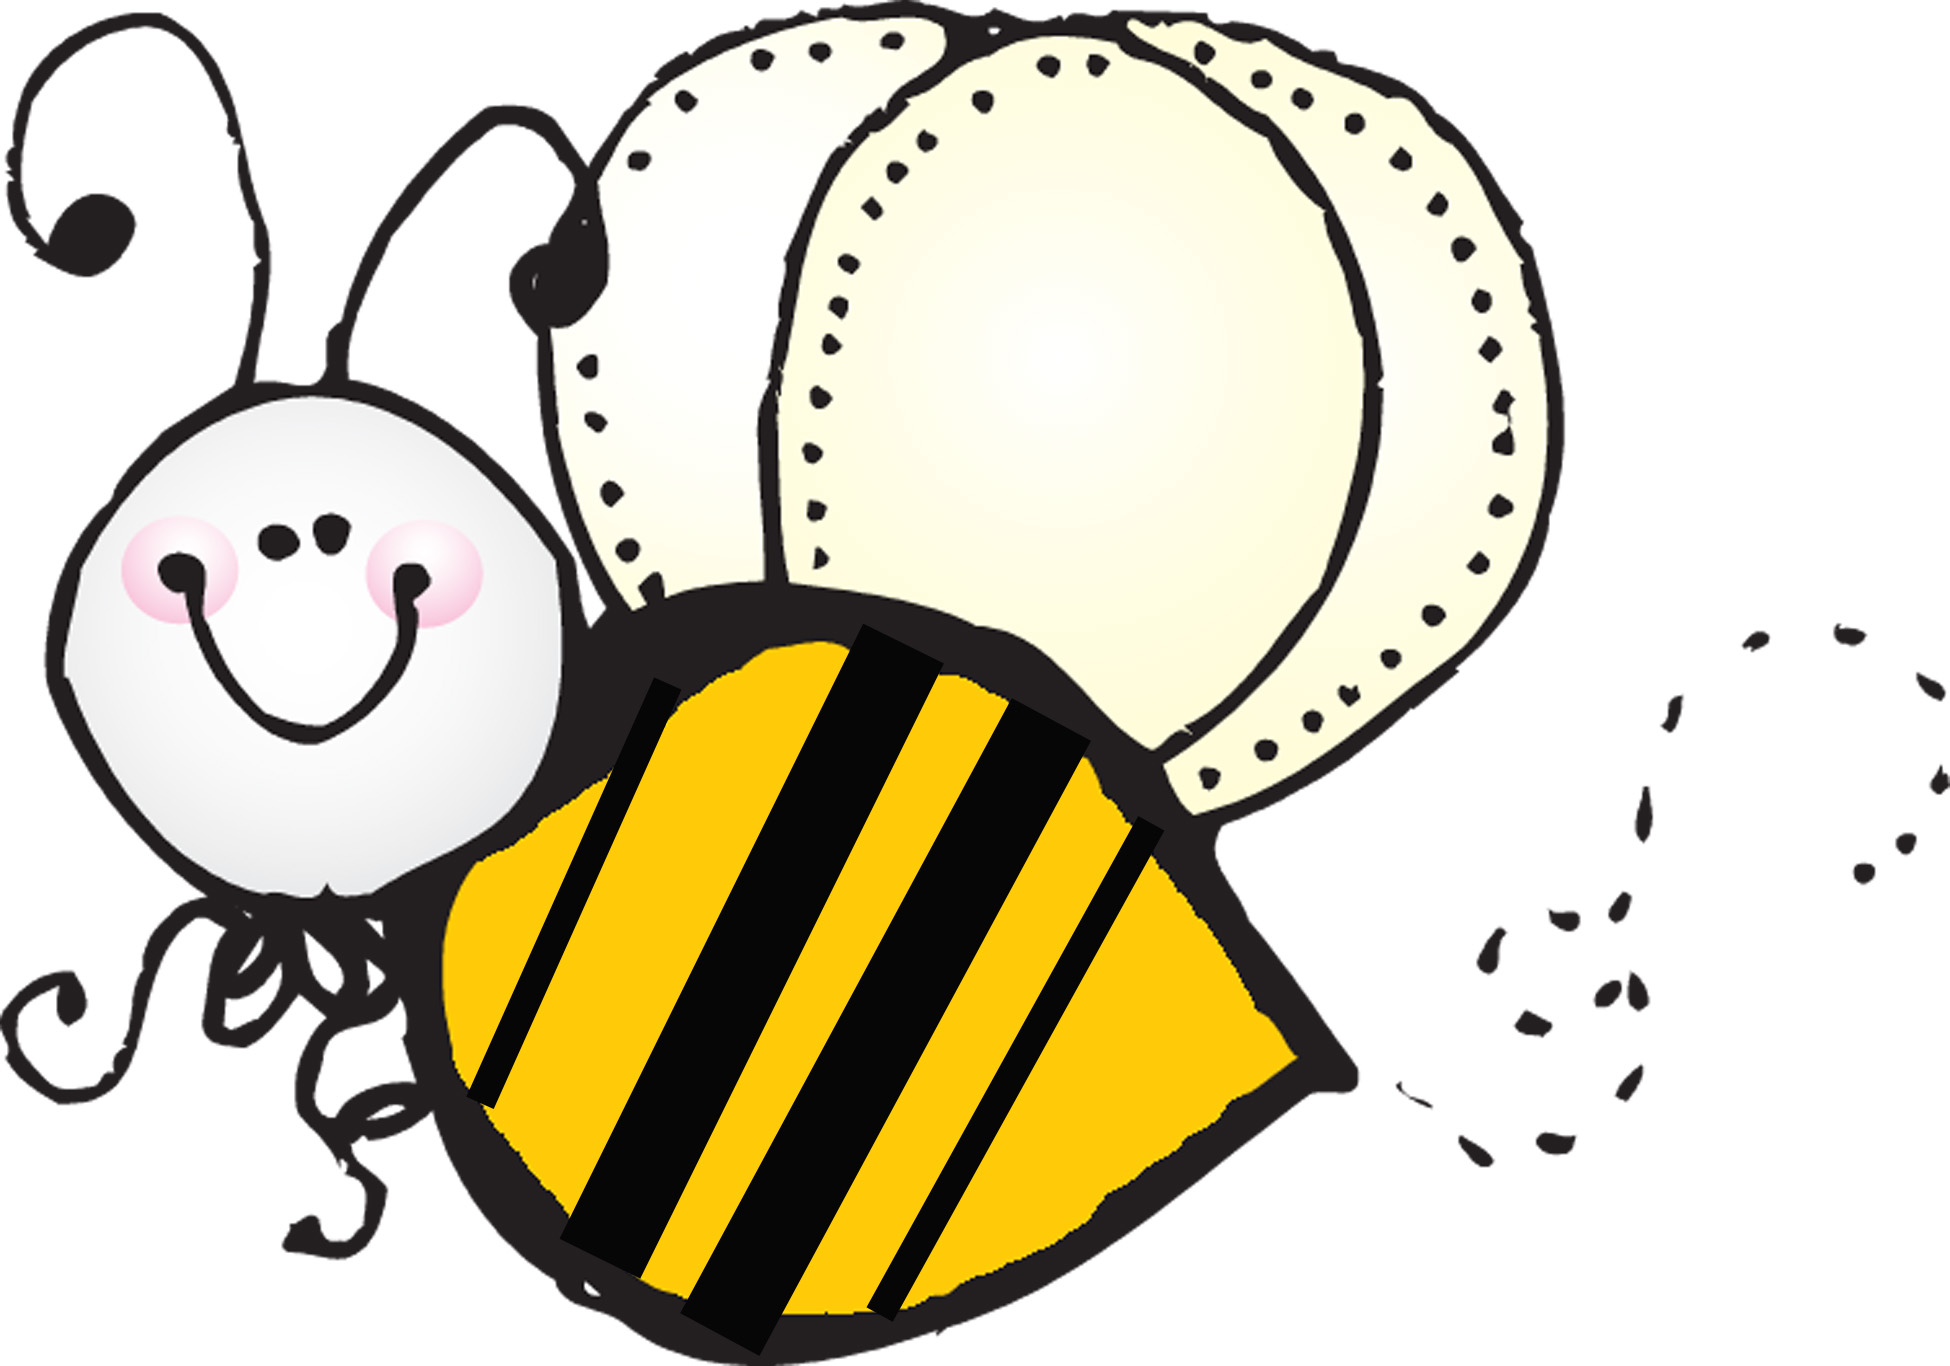 spelling bee clip art images - photo #35